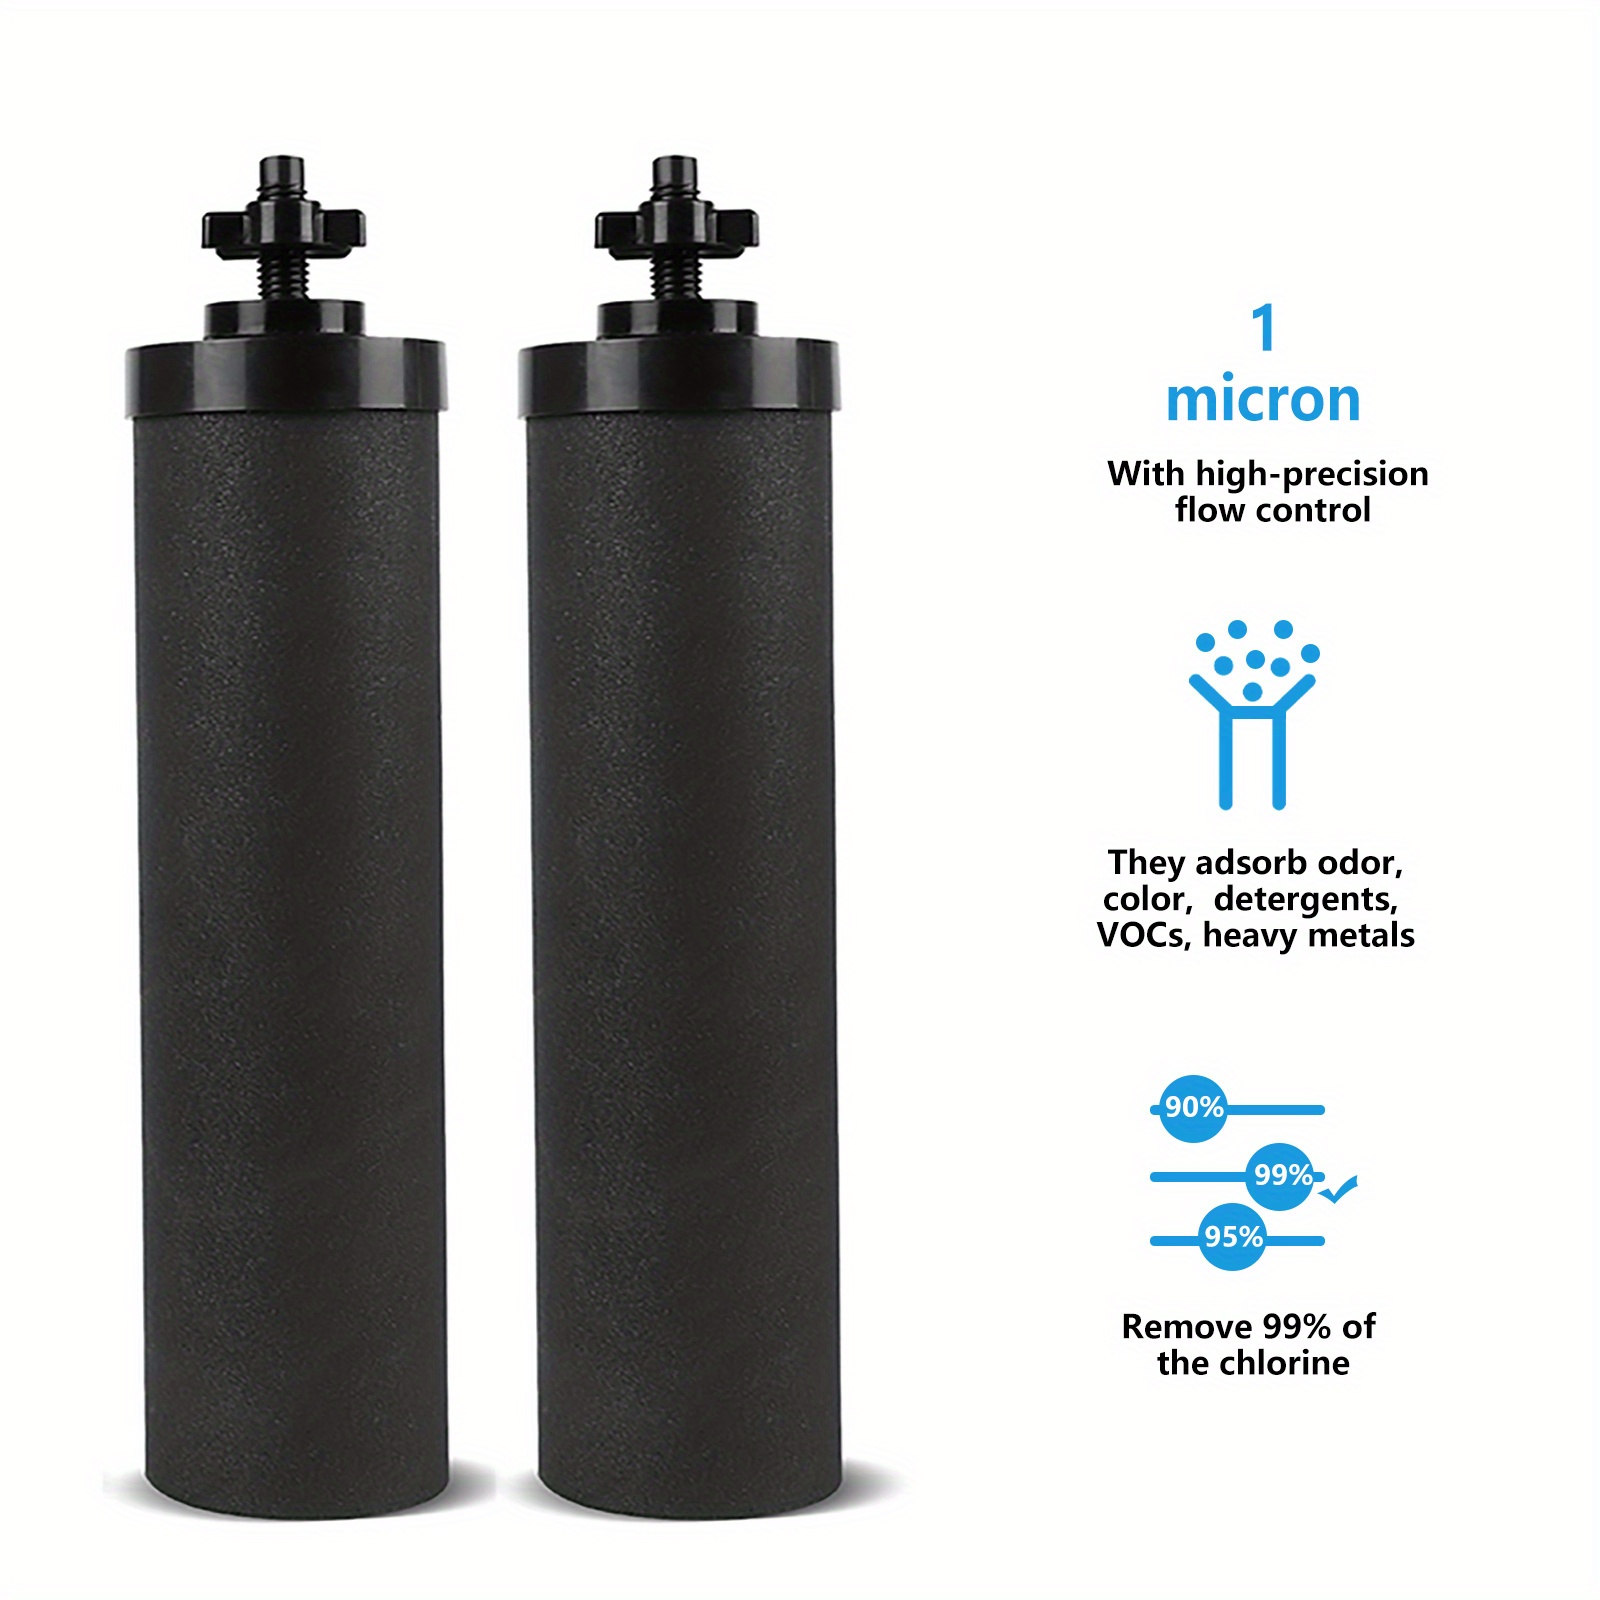 2pcs gravity water filter system and replacement carbon block filter for stainless steel countertop purifying element details 1